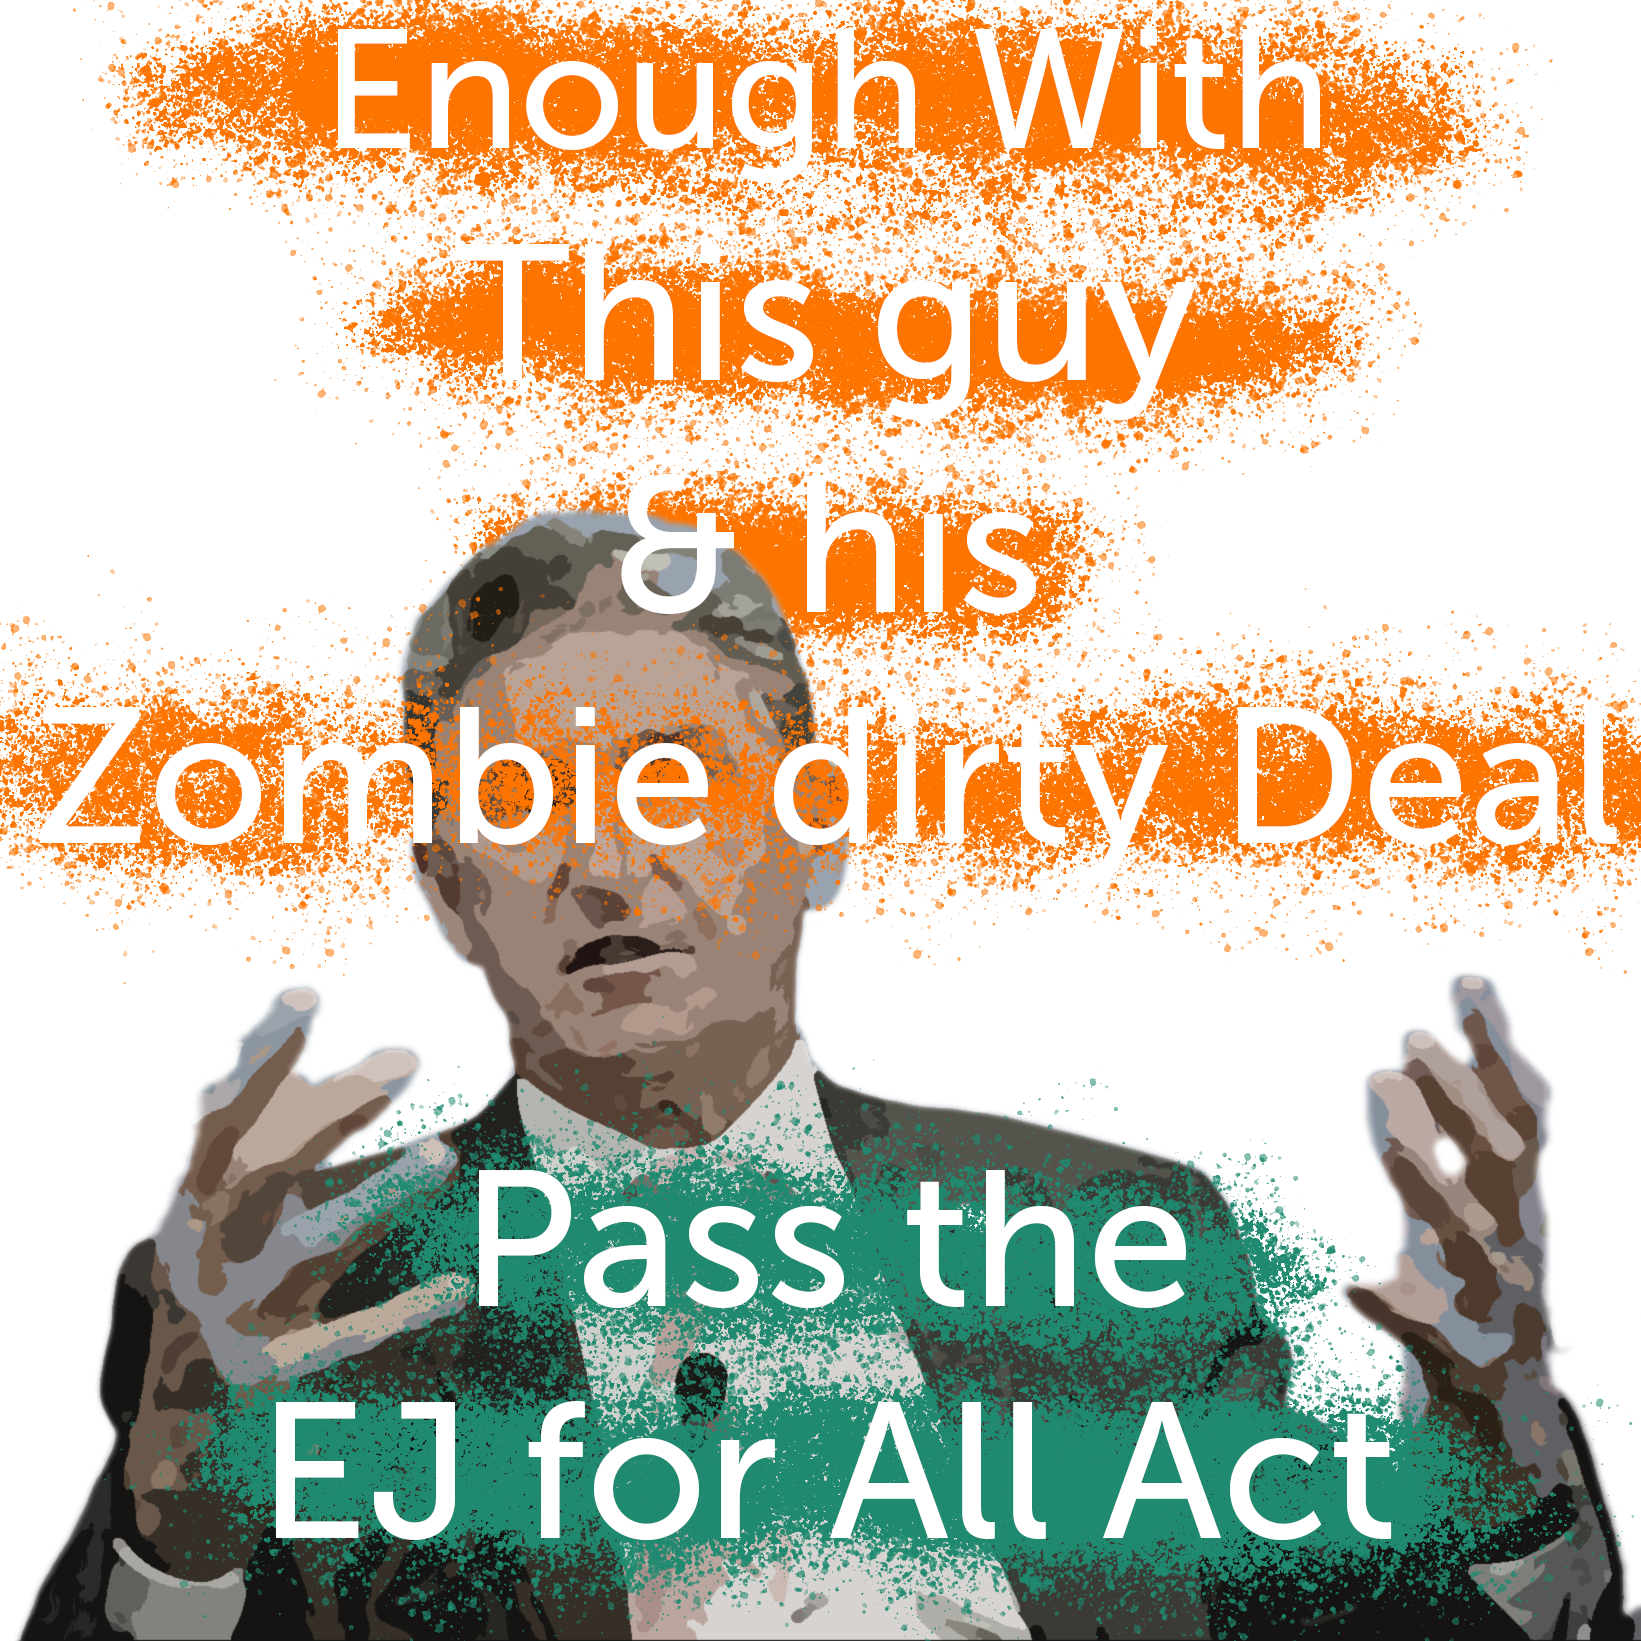 Enought with Manchin and his zombie dirty deal. Let's pass the EJ for All Act instead